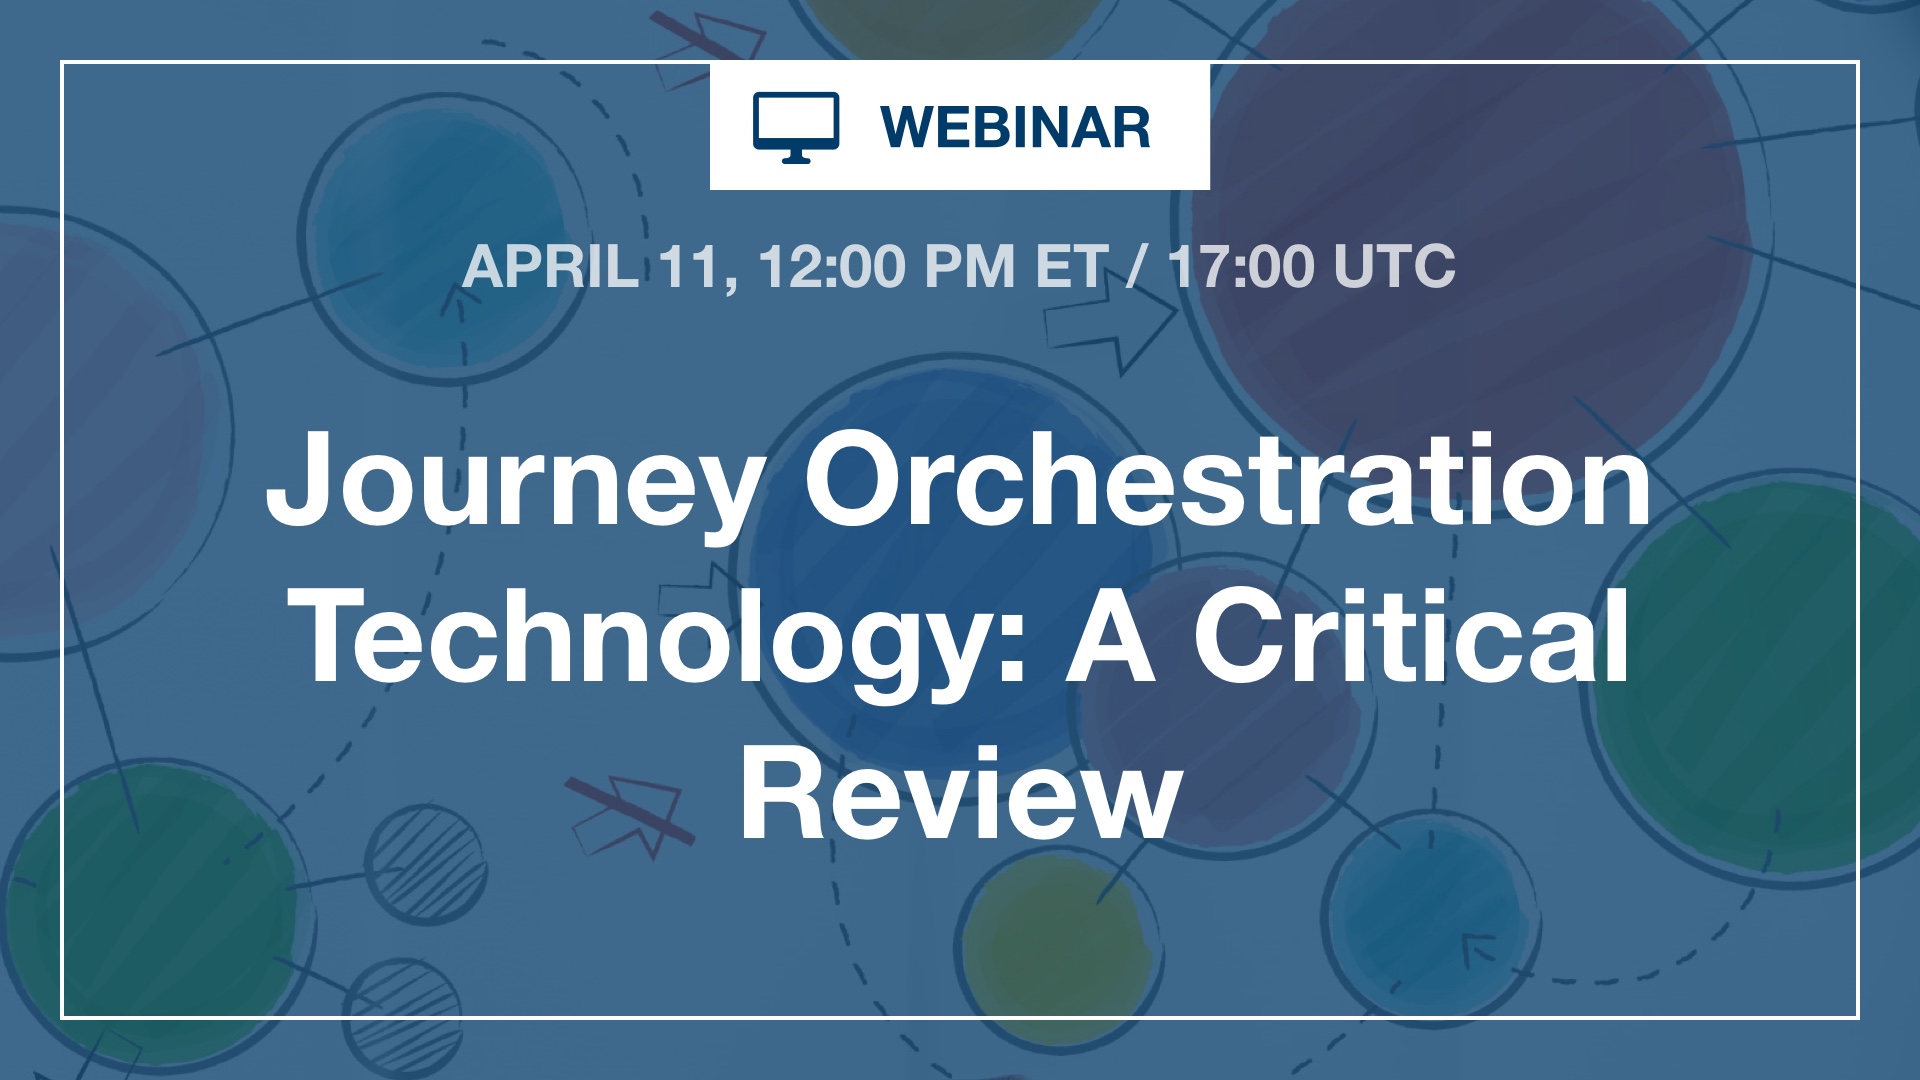 [Webinar] Journey Orchestration Technology: A Critical Review